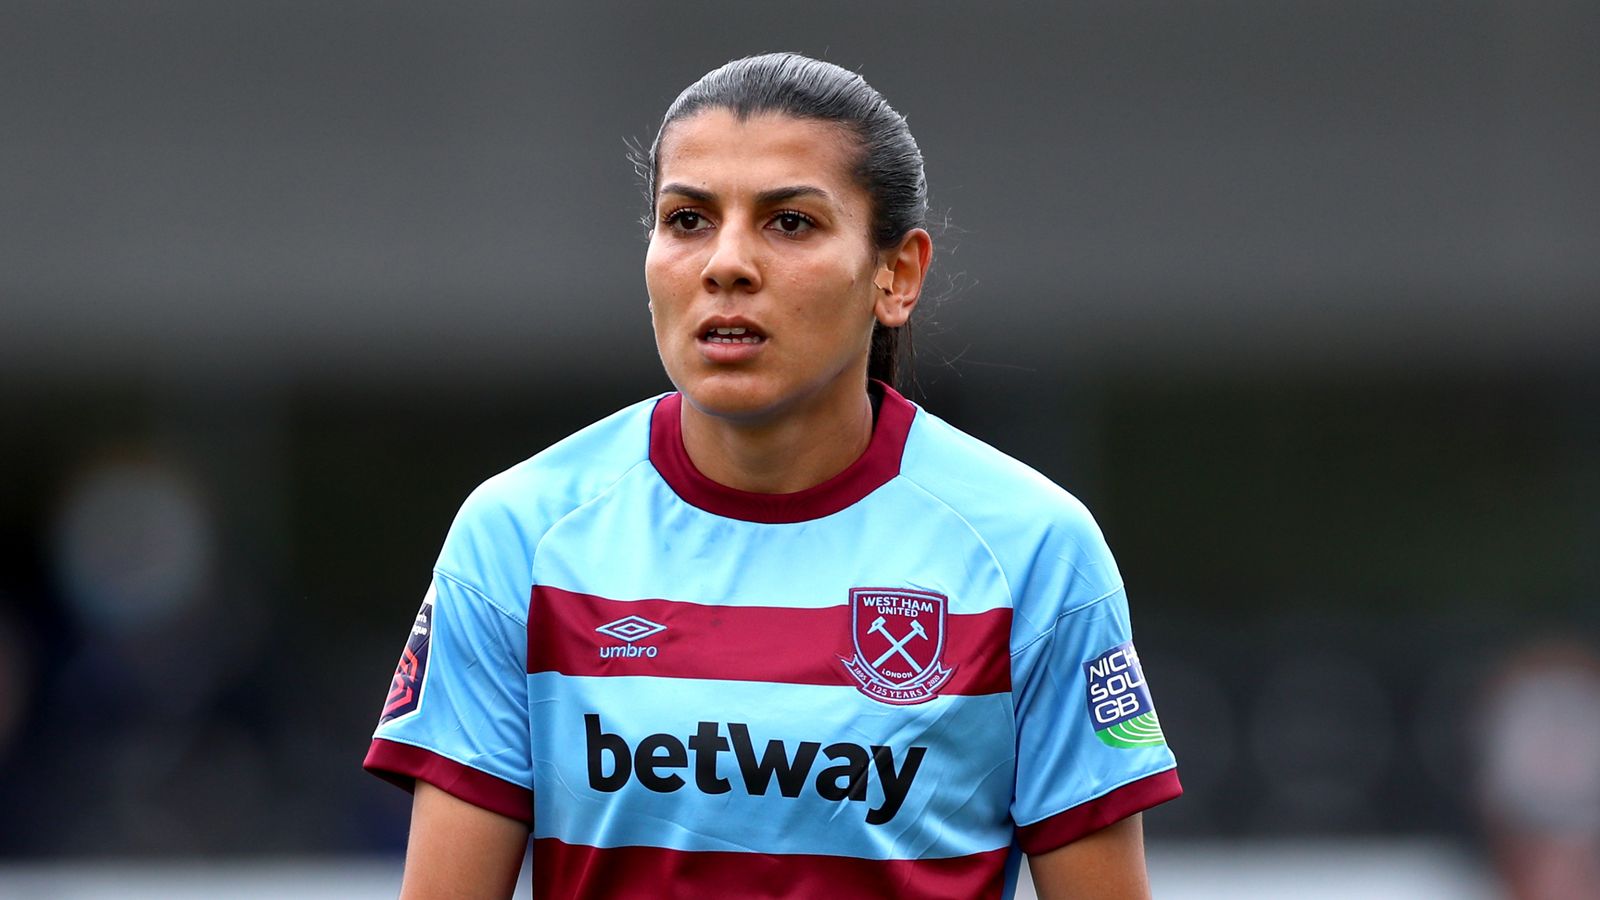 Women's World Cup DFS Playbook August 7: Kenza Dali Is A Top Pick